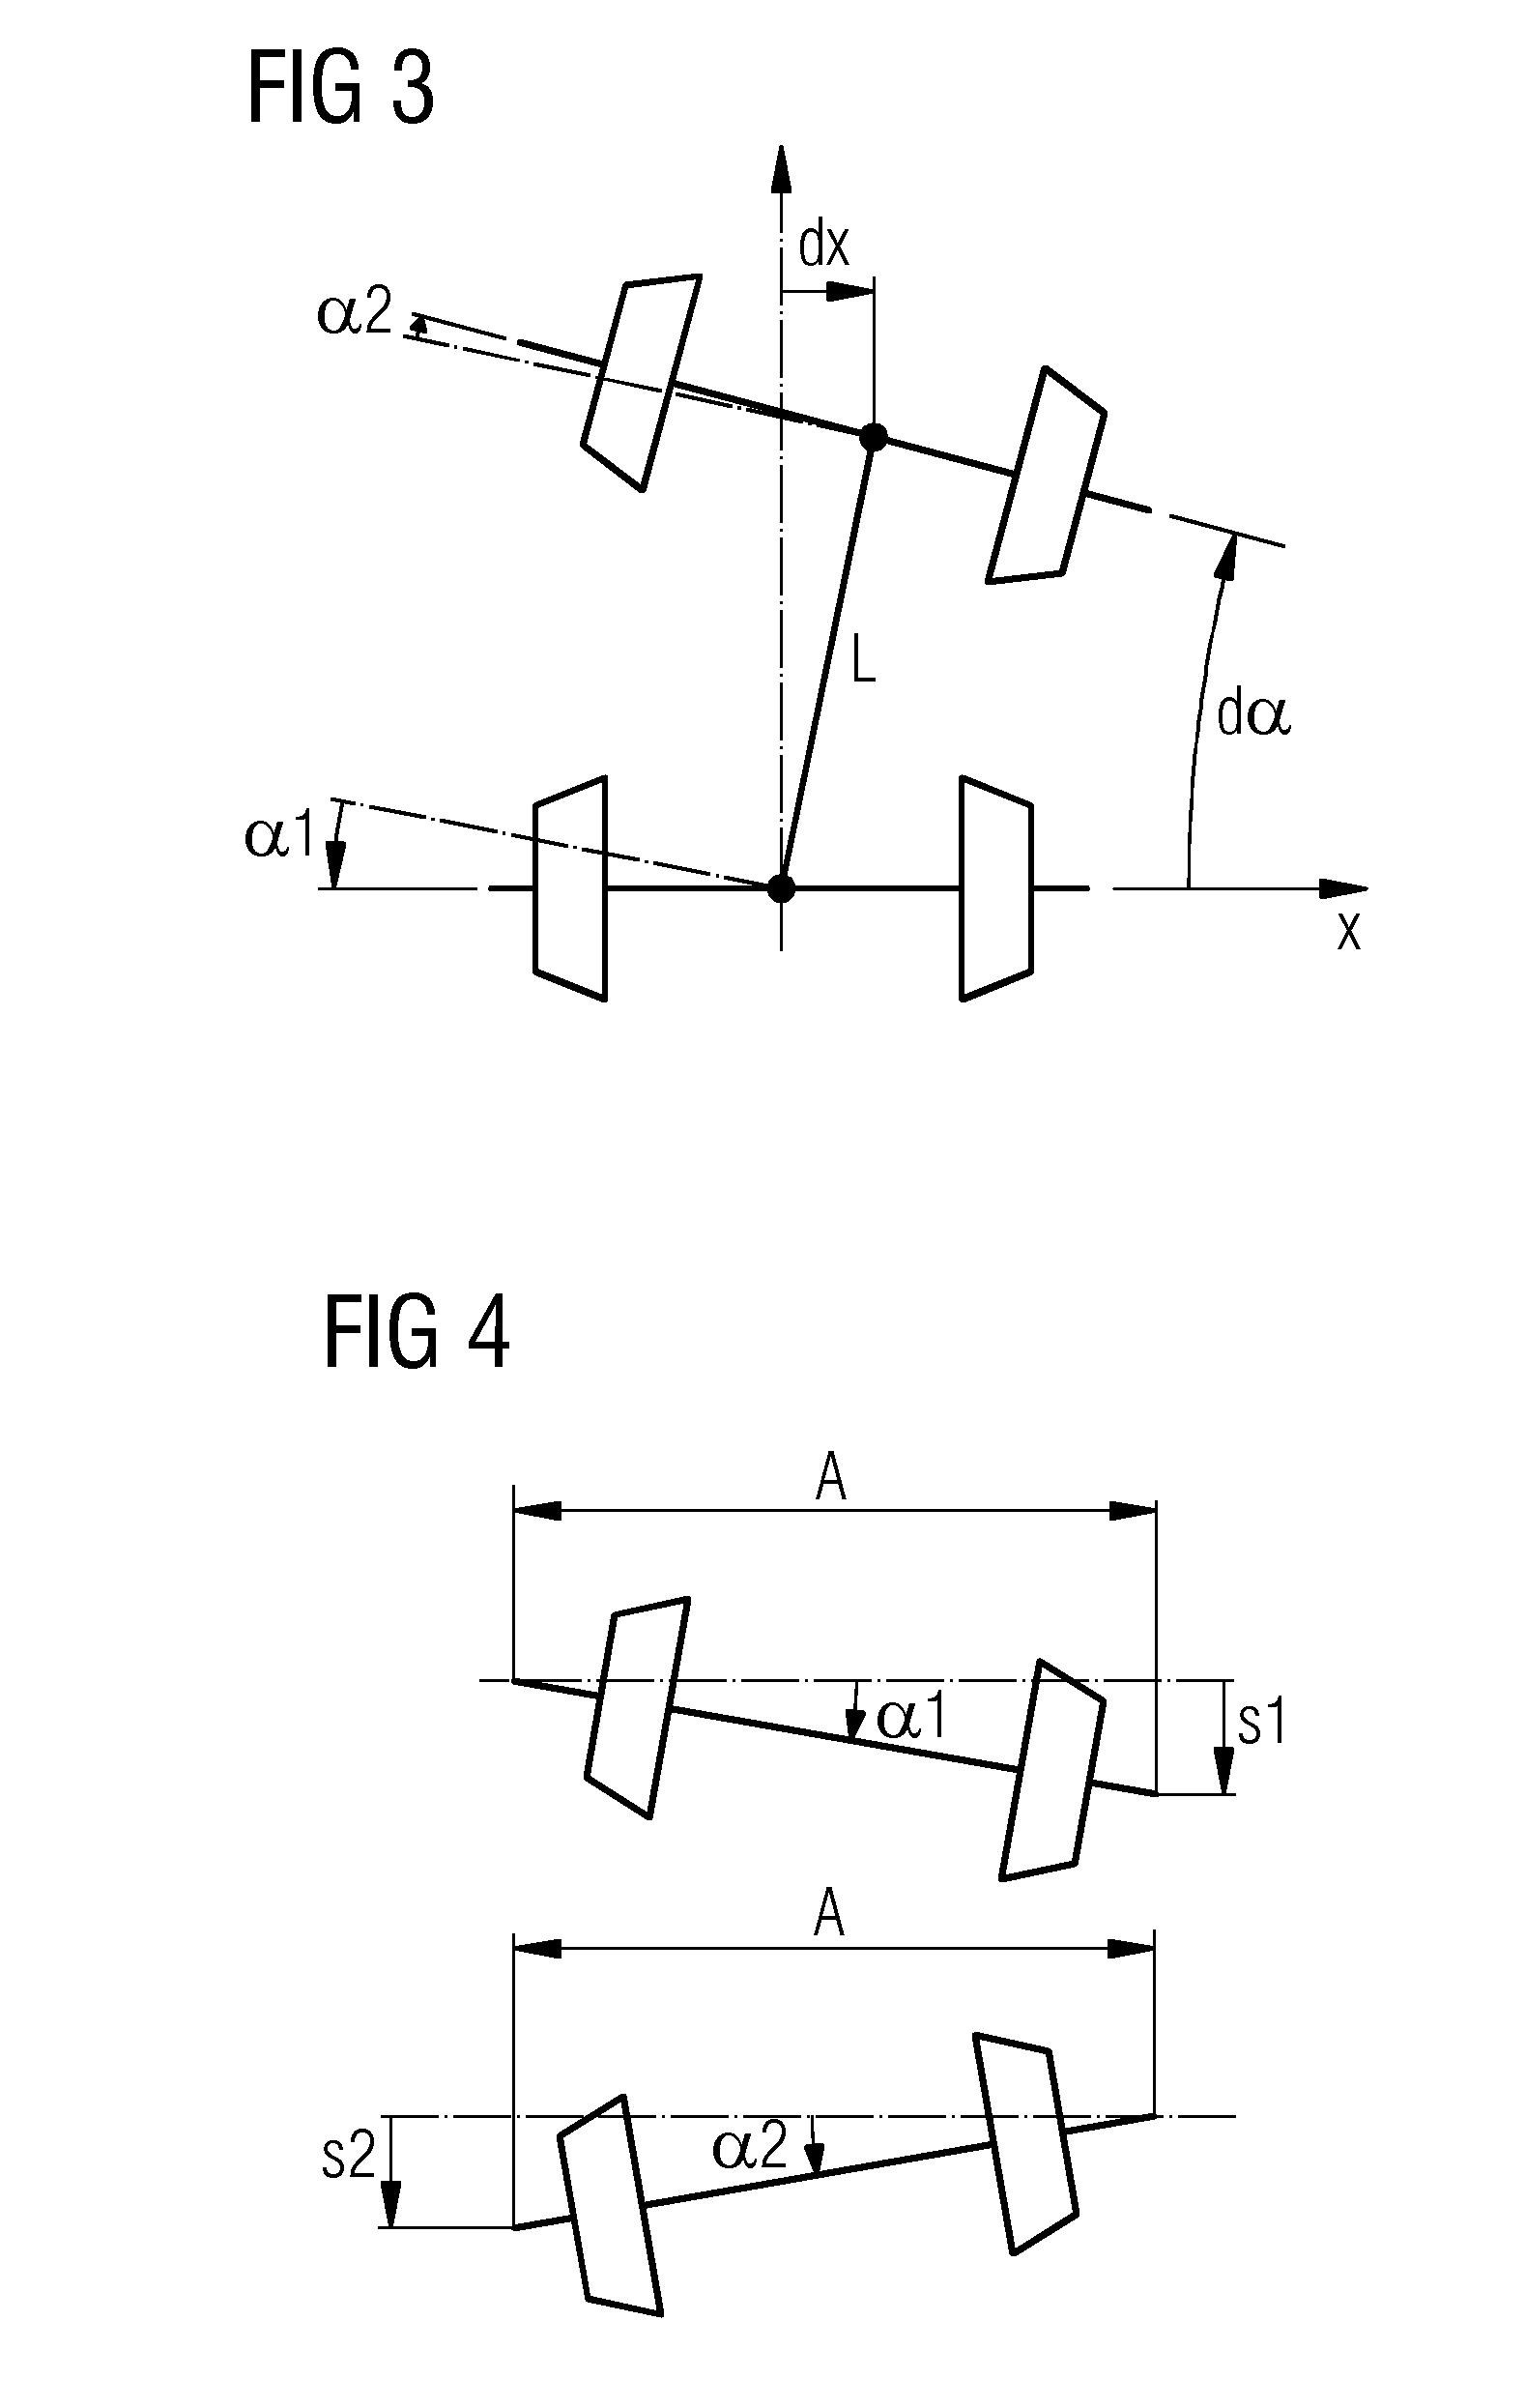 Rail vehicle with variable axial geometry